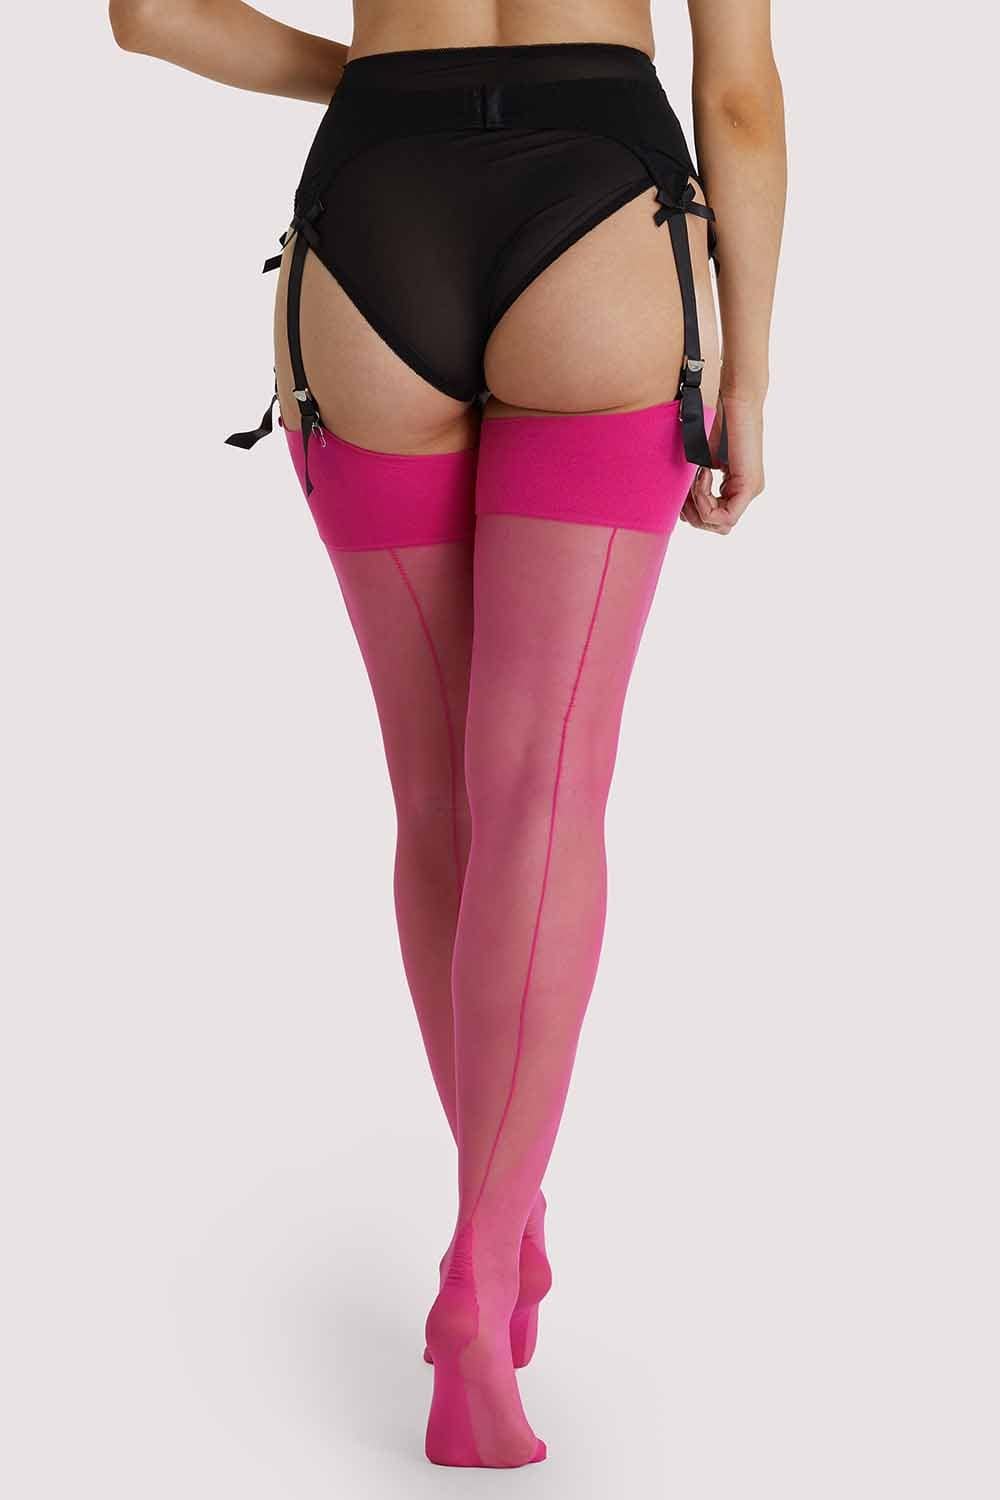 Pink Peacock Seamed Stockings – Playful Promises